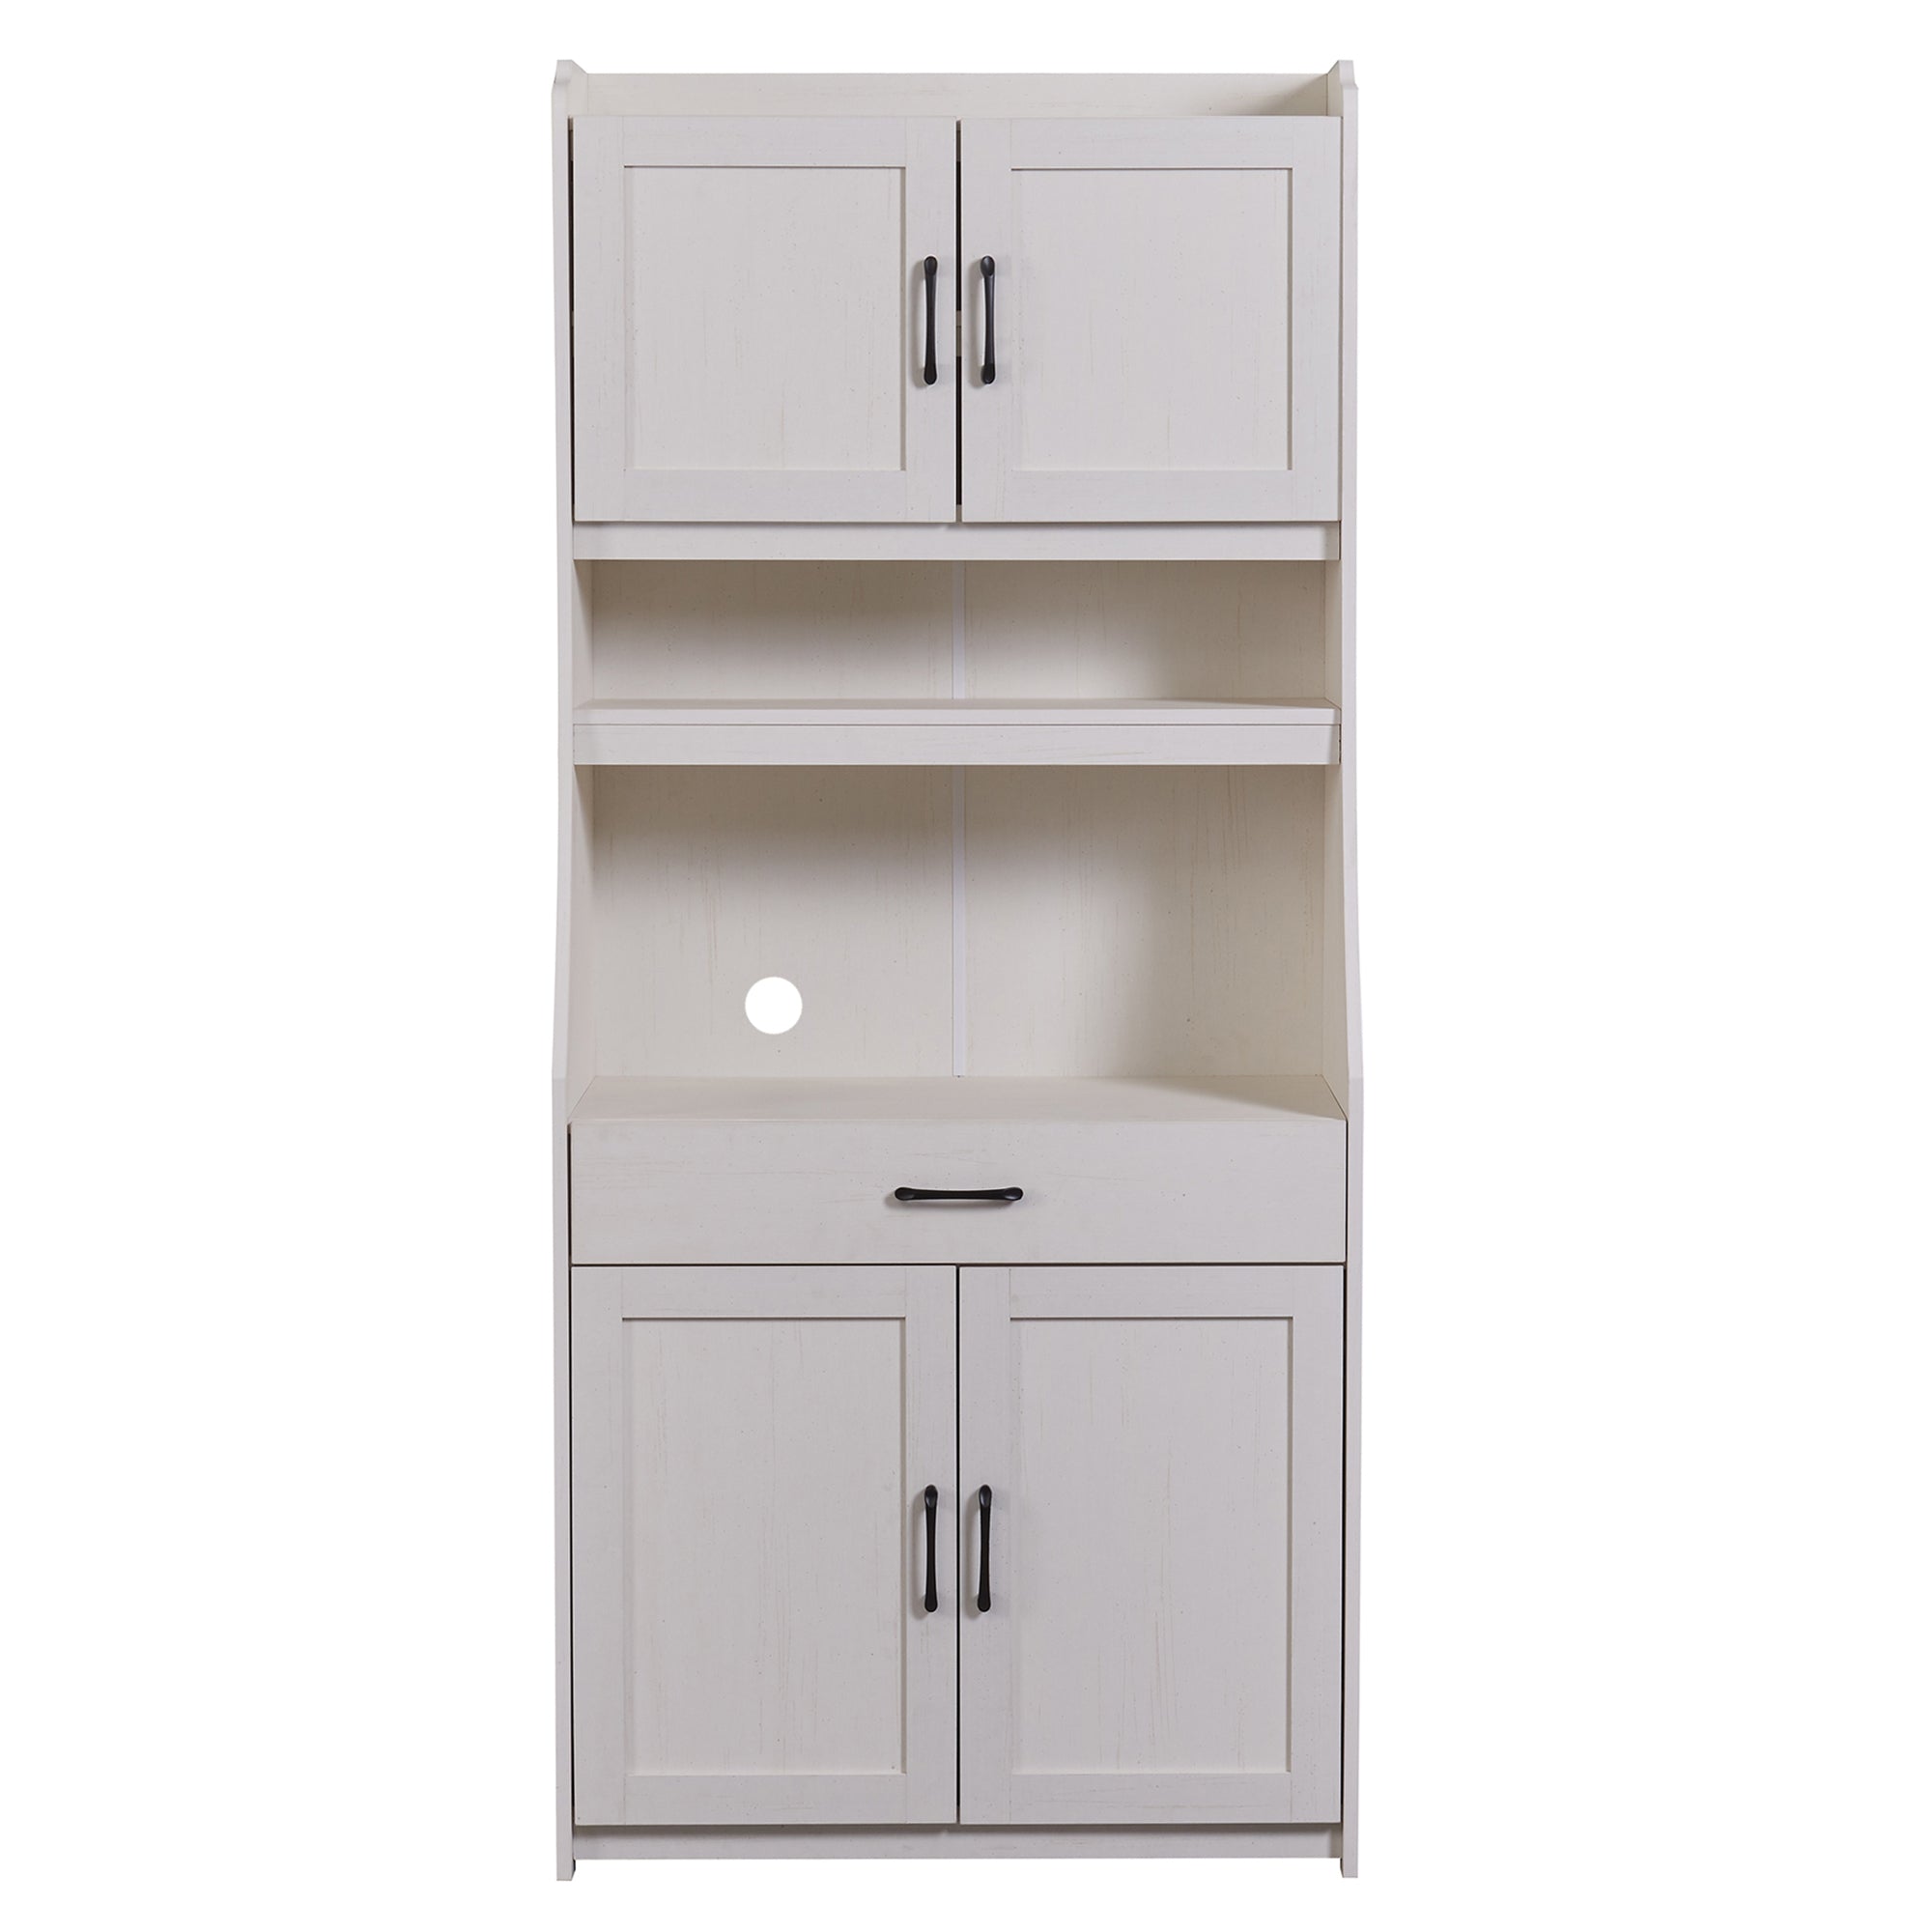 TREXM One-body Style Pantry Cabinet Kitchen Living Room Dining Room Storage Buffet with Doors, Adjustable Shelves (Antique White)